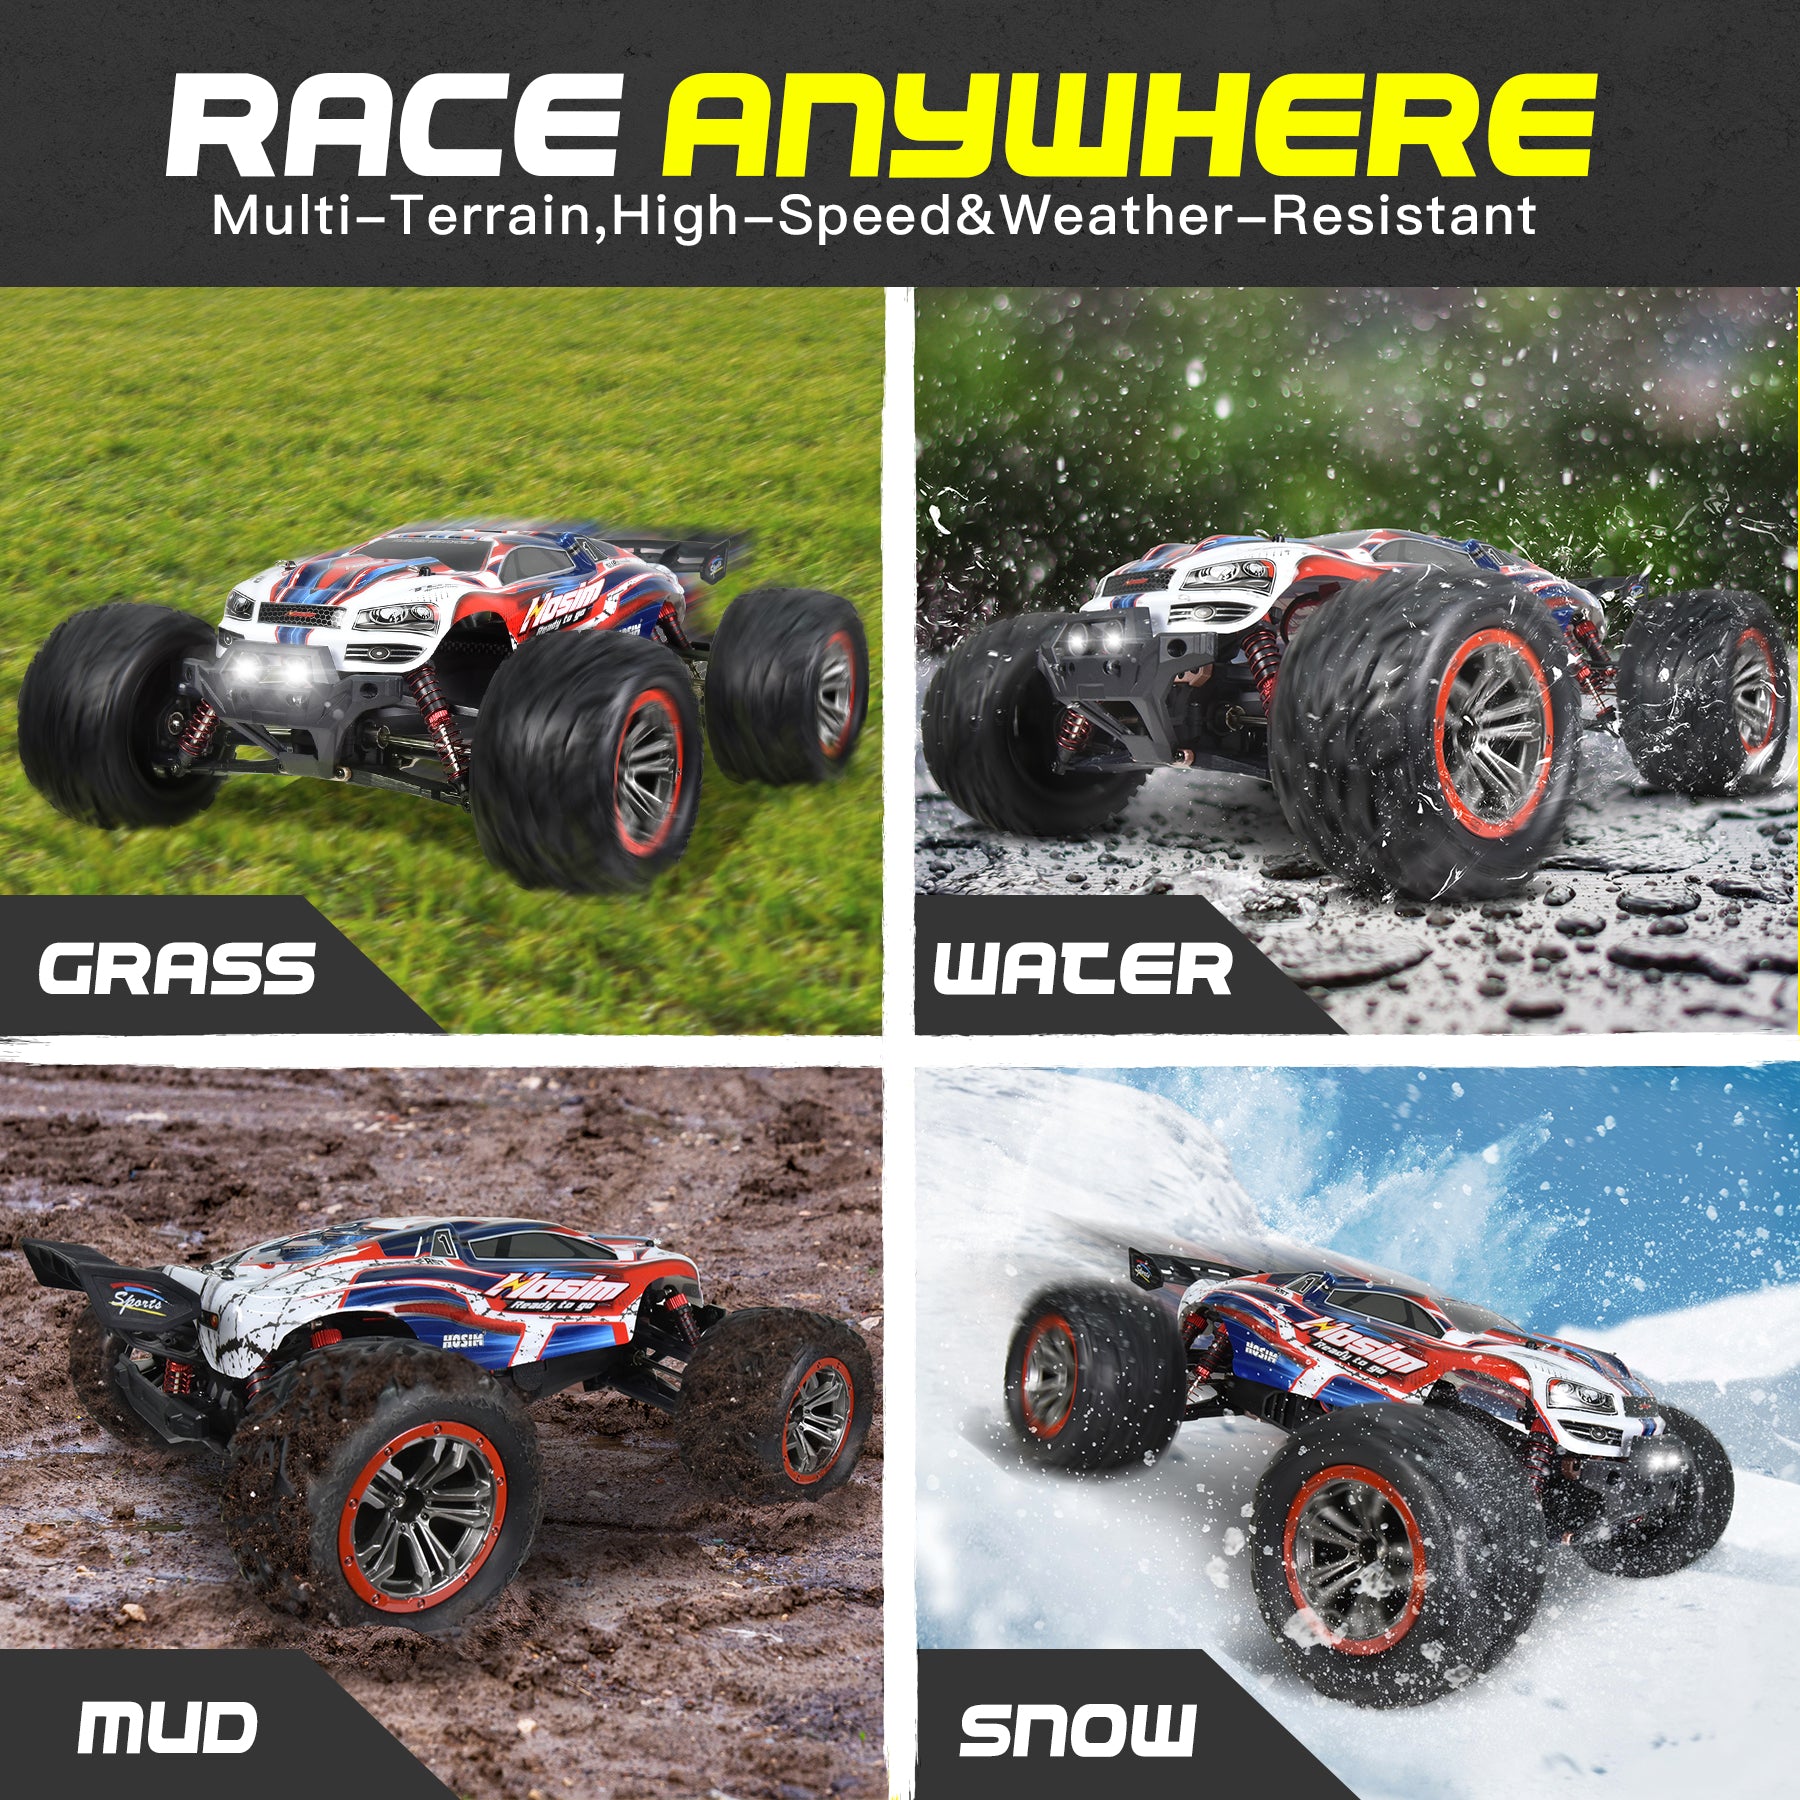 Hosim 1:10 RC Cars 2.4GHz Remote Control Car 4WD 48+ KMH Off Road Monster Truck Buggy Toy for Boys  Adults Gifts